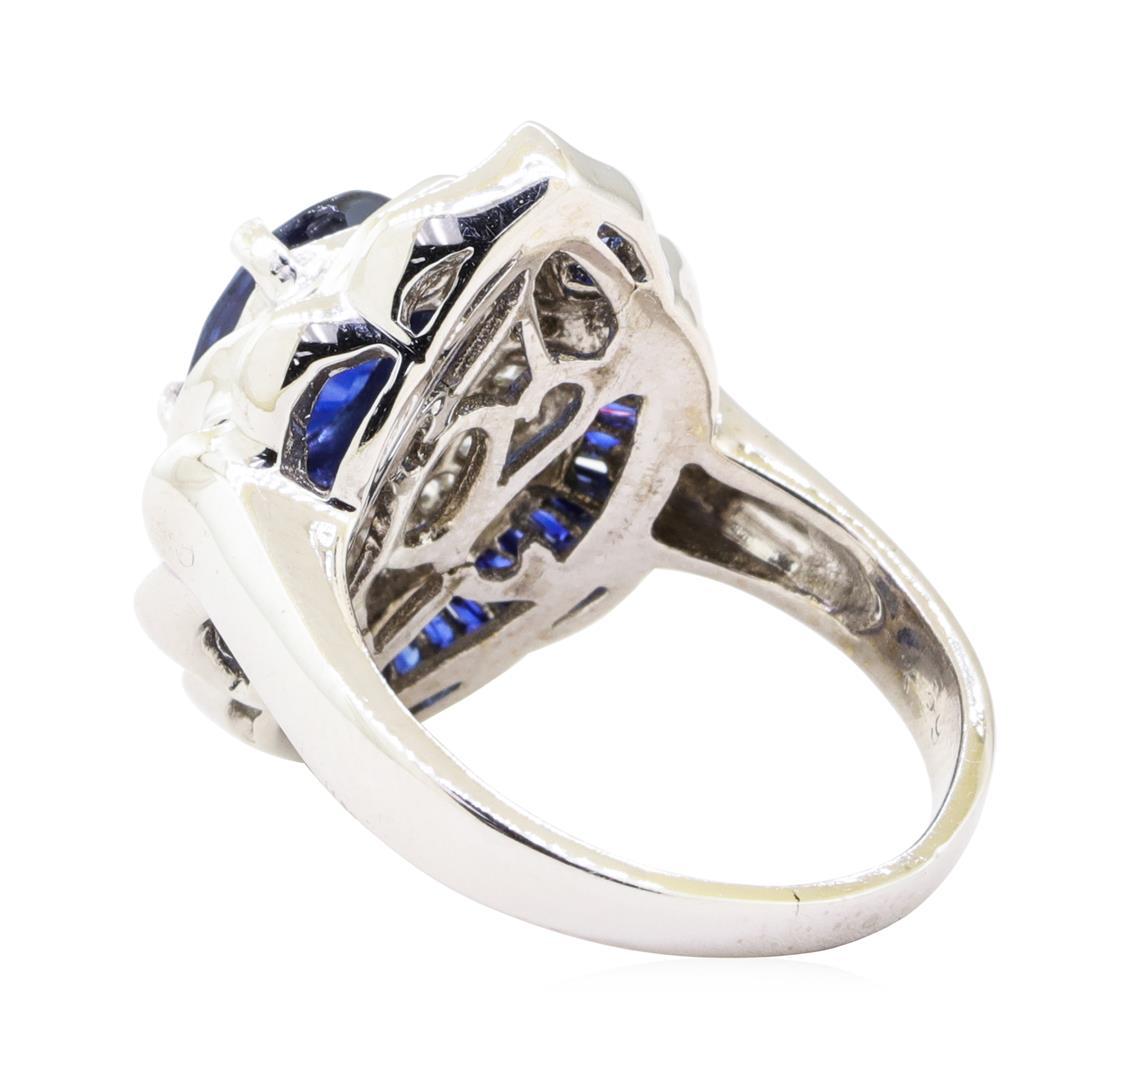 3.20 ctw Sapphire and Diamond Ring - 14KT White Gold